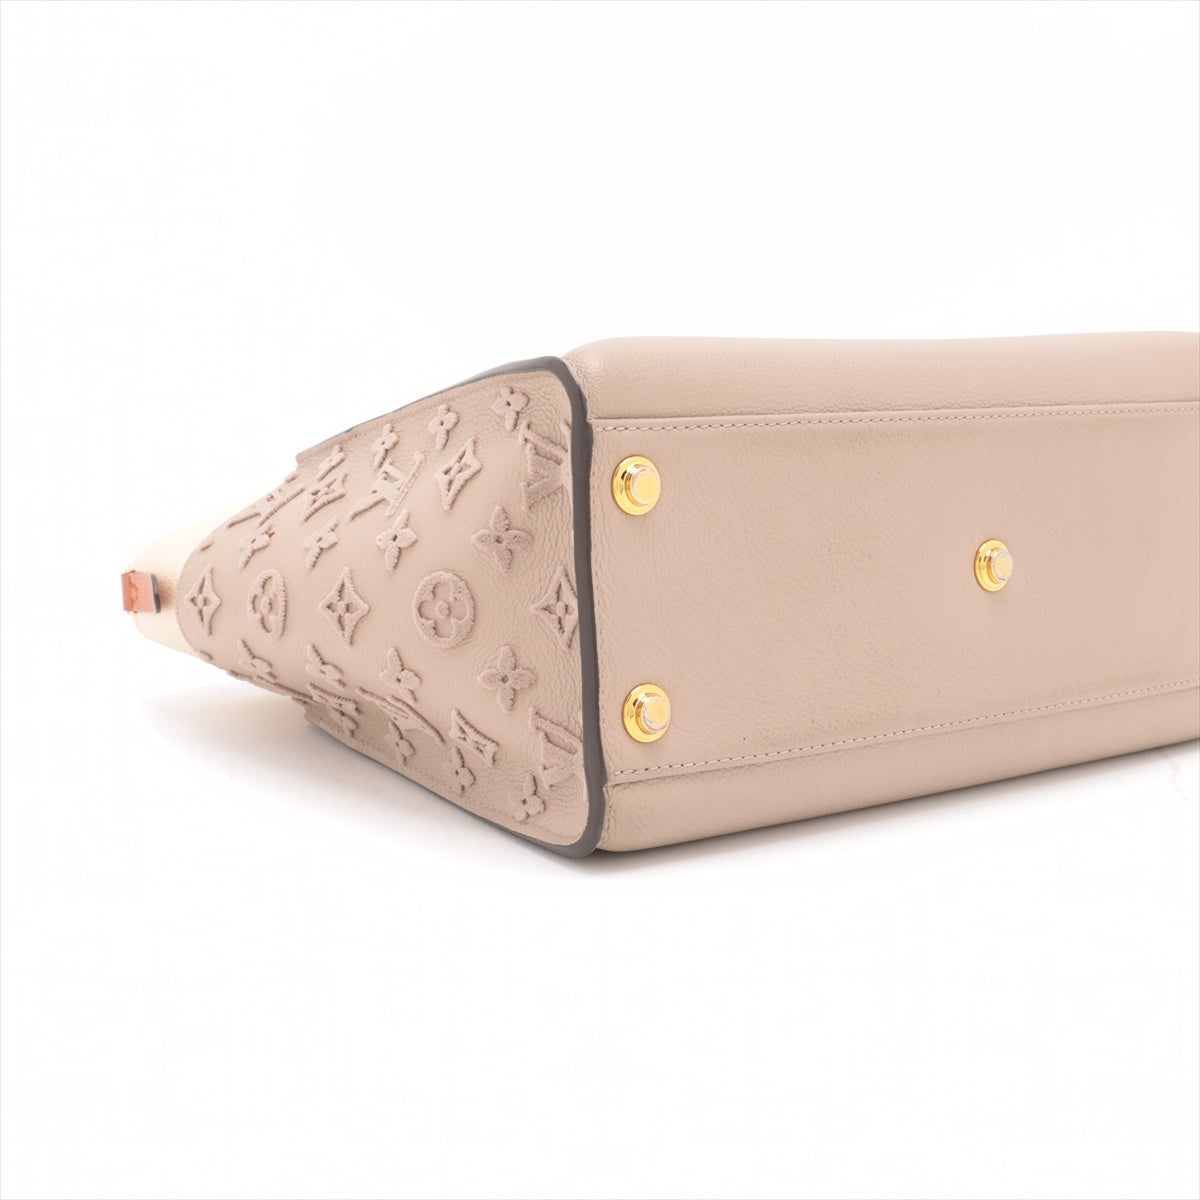 Louis Vuitton Monogram Tuffetage OnMySide M53825 There are burnt marks on the inside